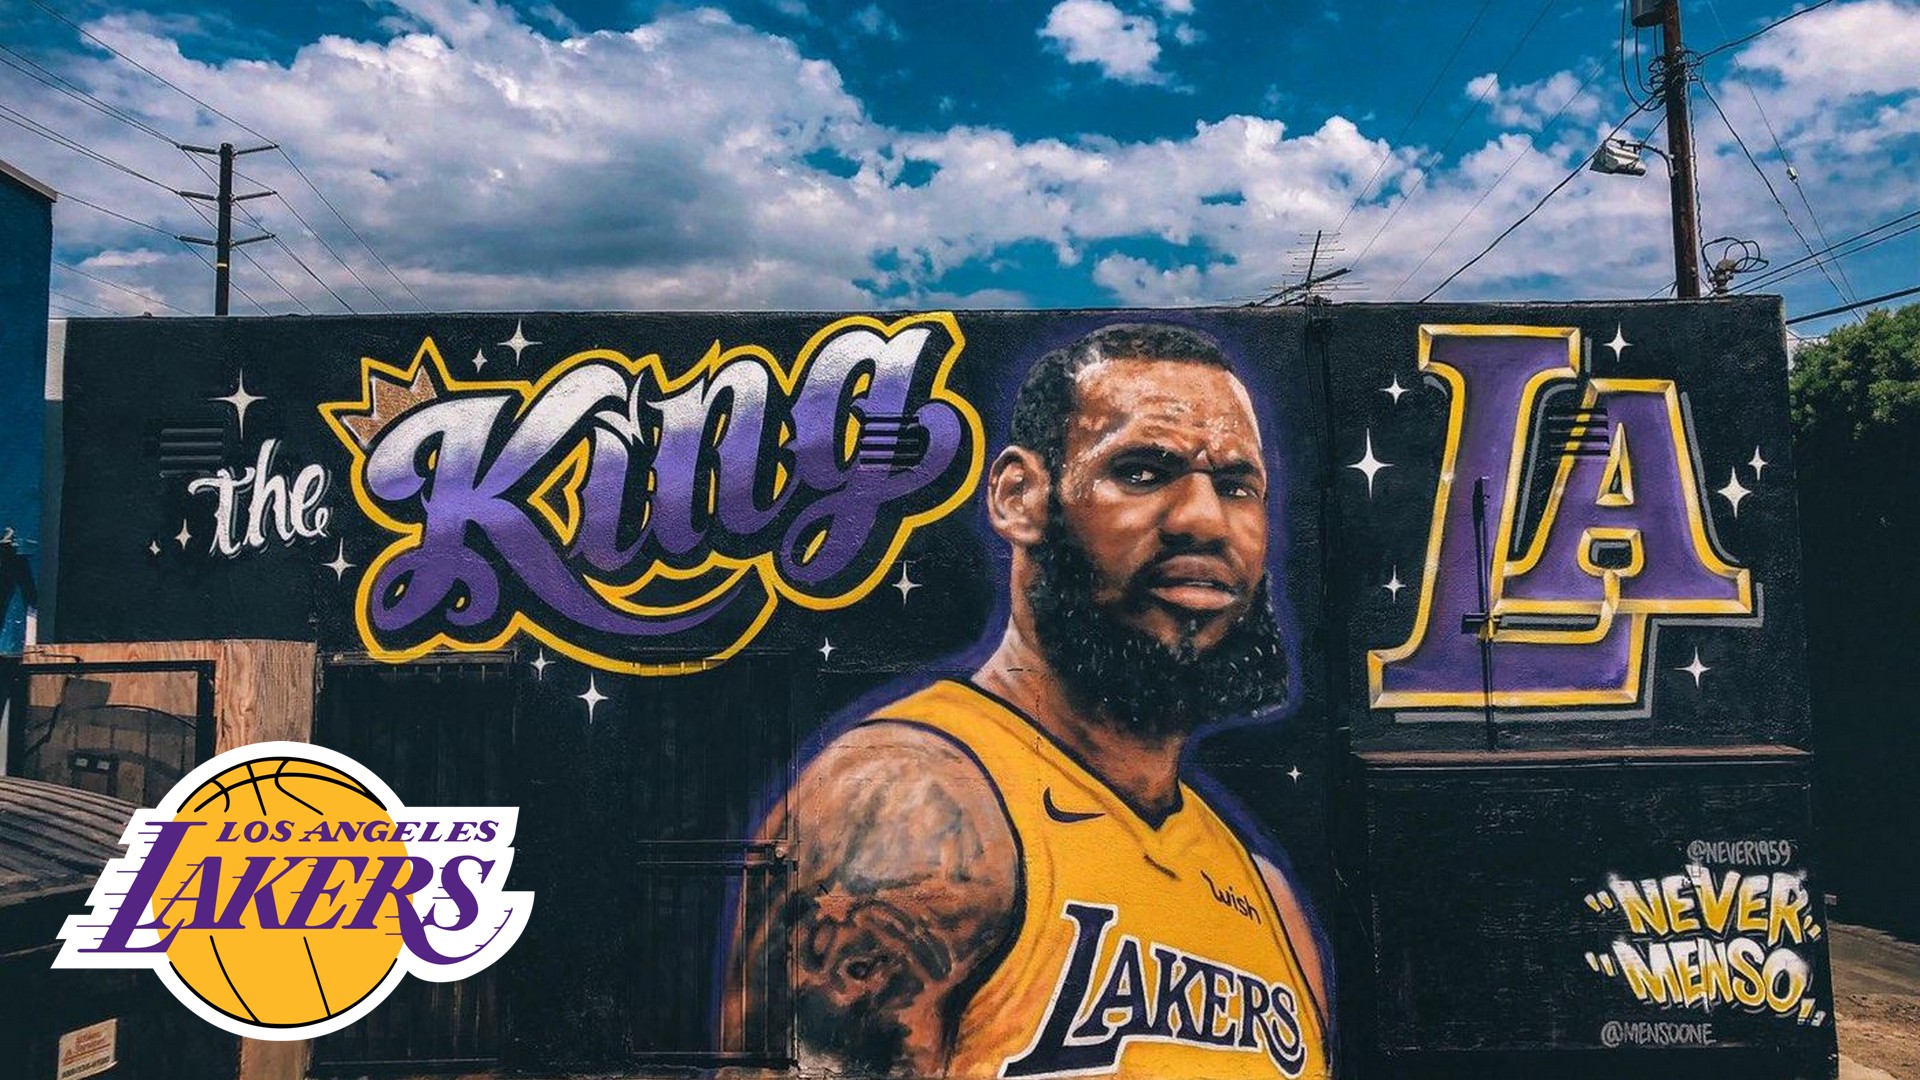 LeBron James LA Lakers Wallpaper with image dimensions 1920x1080 pixel. You can make this wallpaper for your Desktop Computer Backgrounds, Windows or Mac Screensavers, iPhone Lock screen, Tablet or Android and another Mobile Phone device